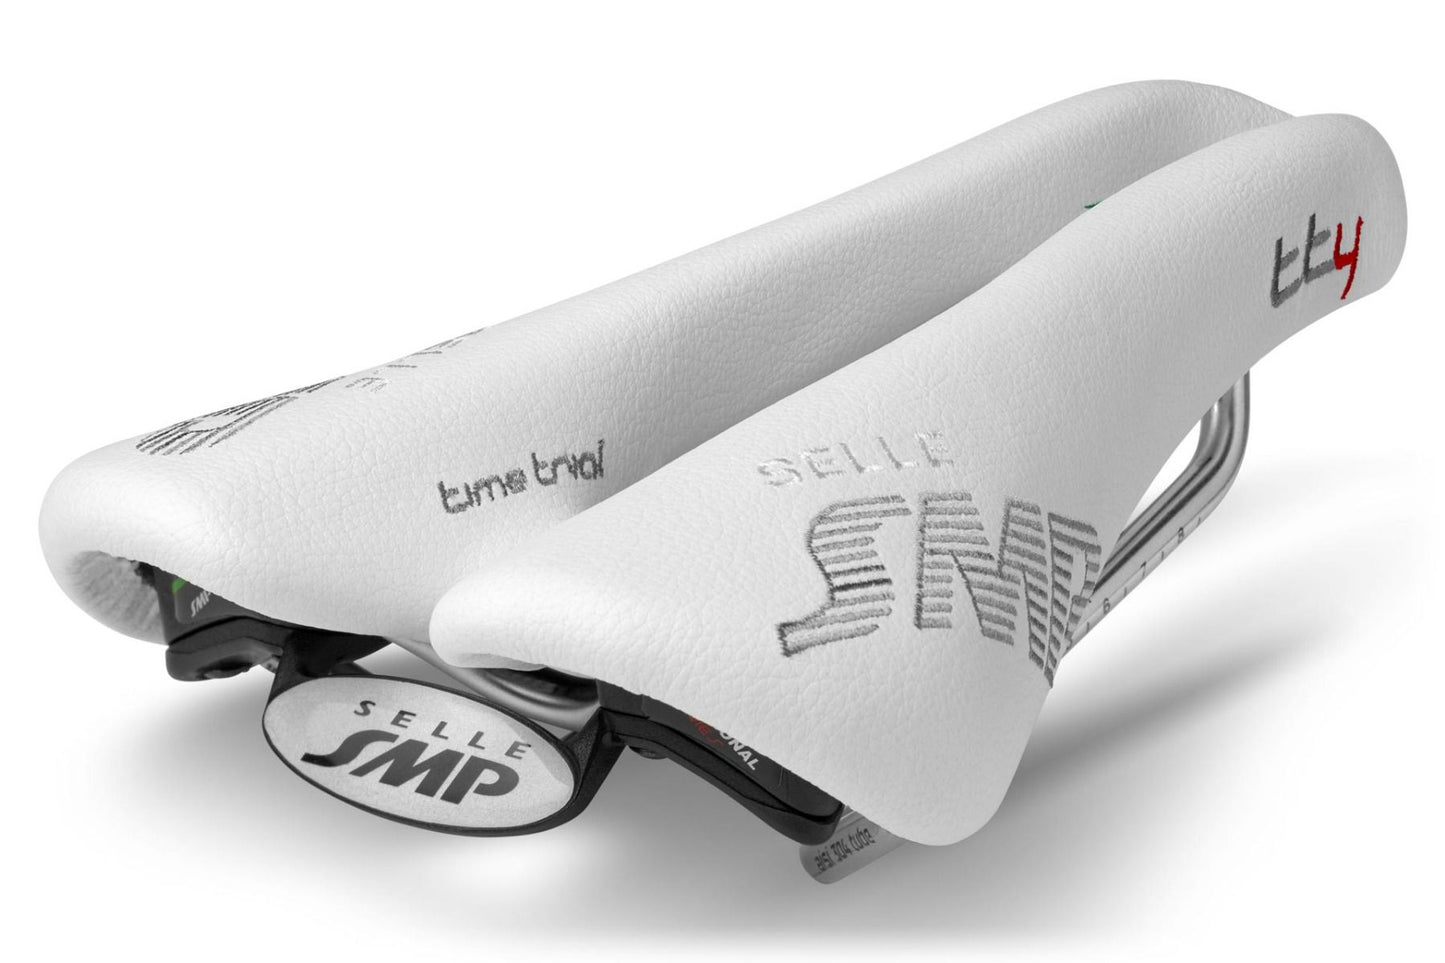 Selle SMP TT4 Time Trial Saddle with Steel Rails (White)